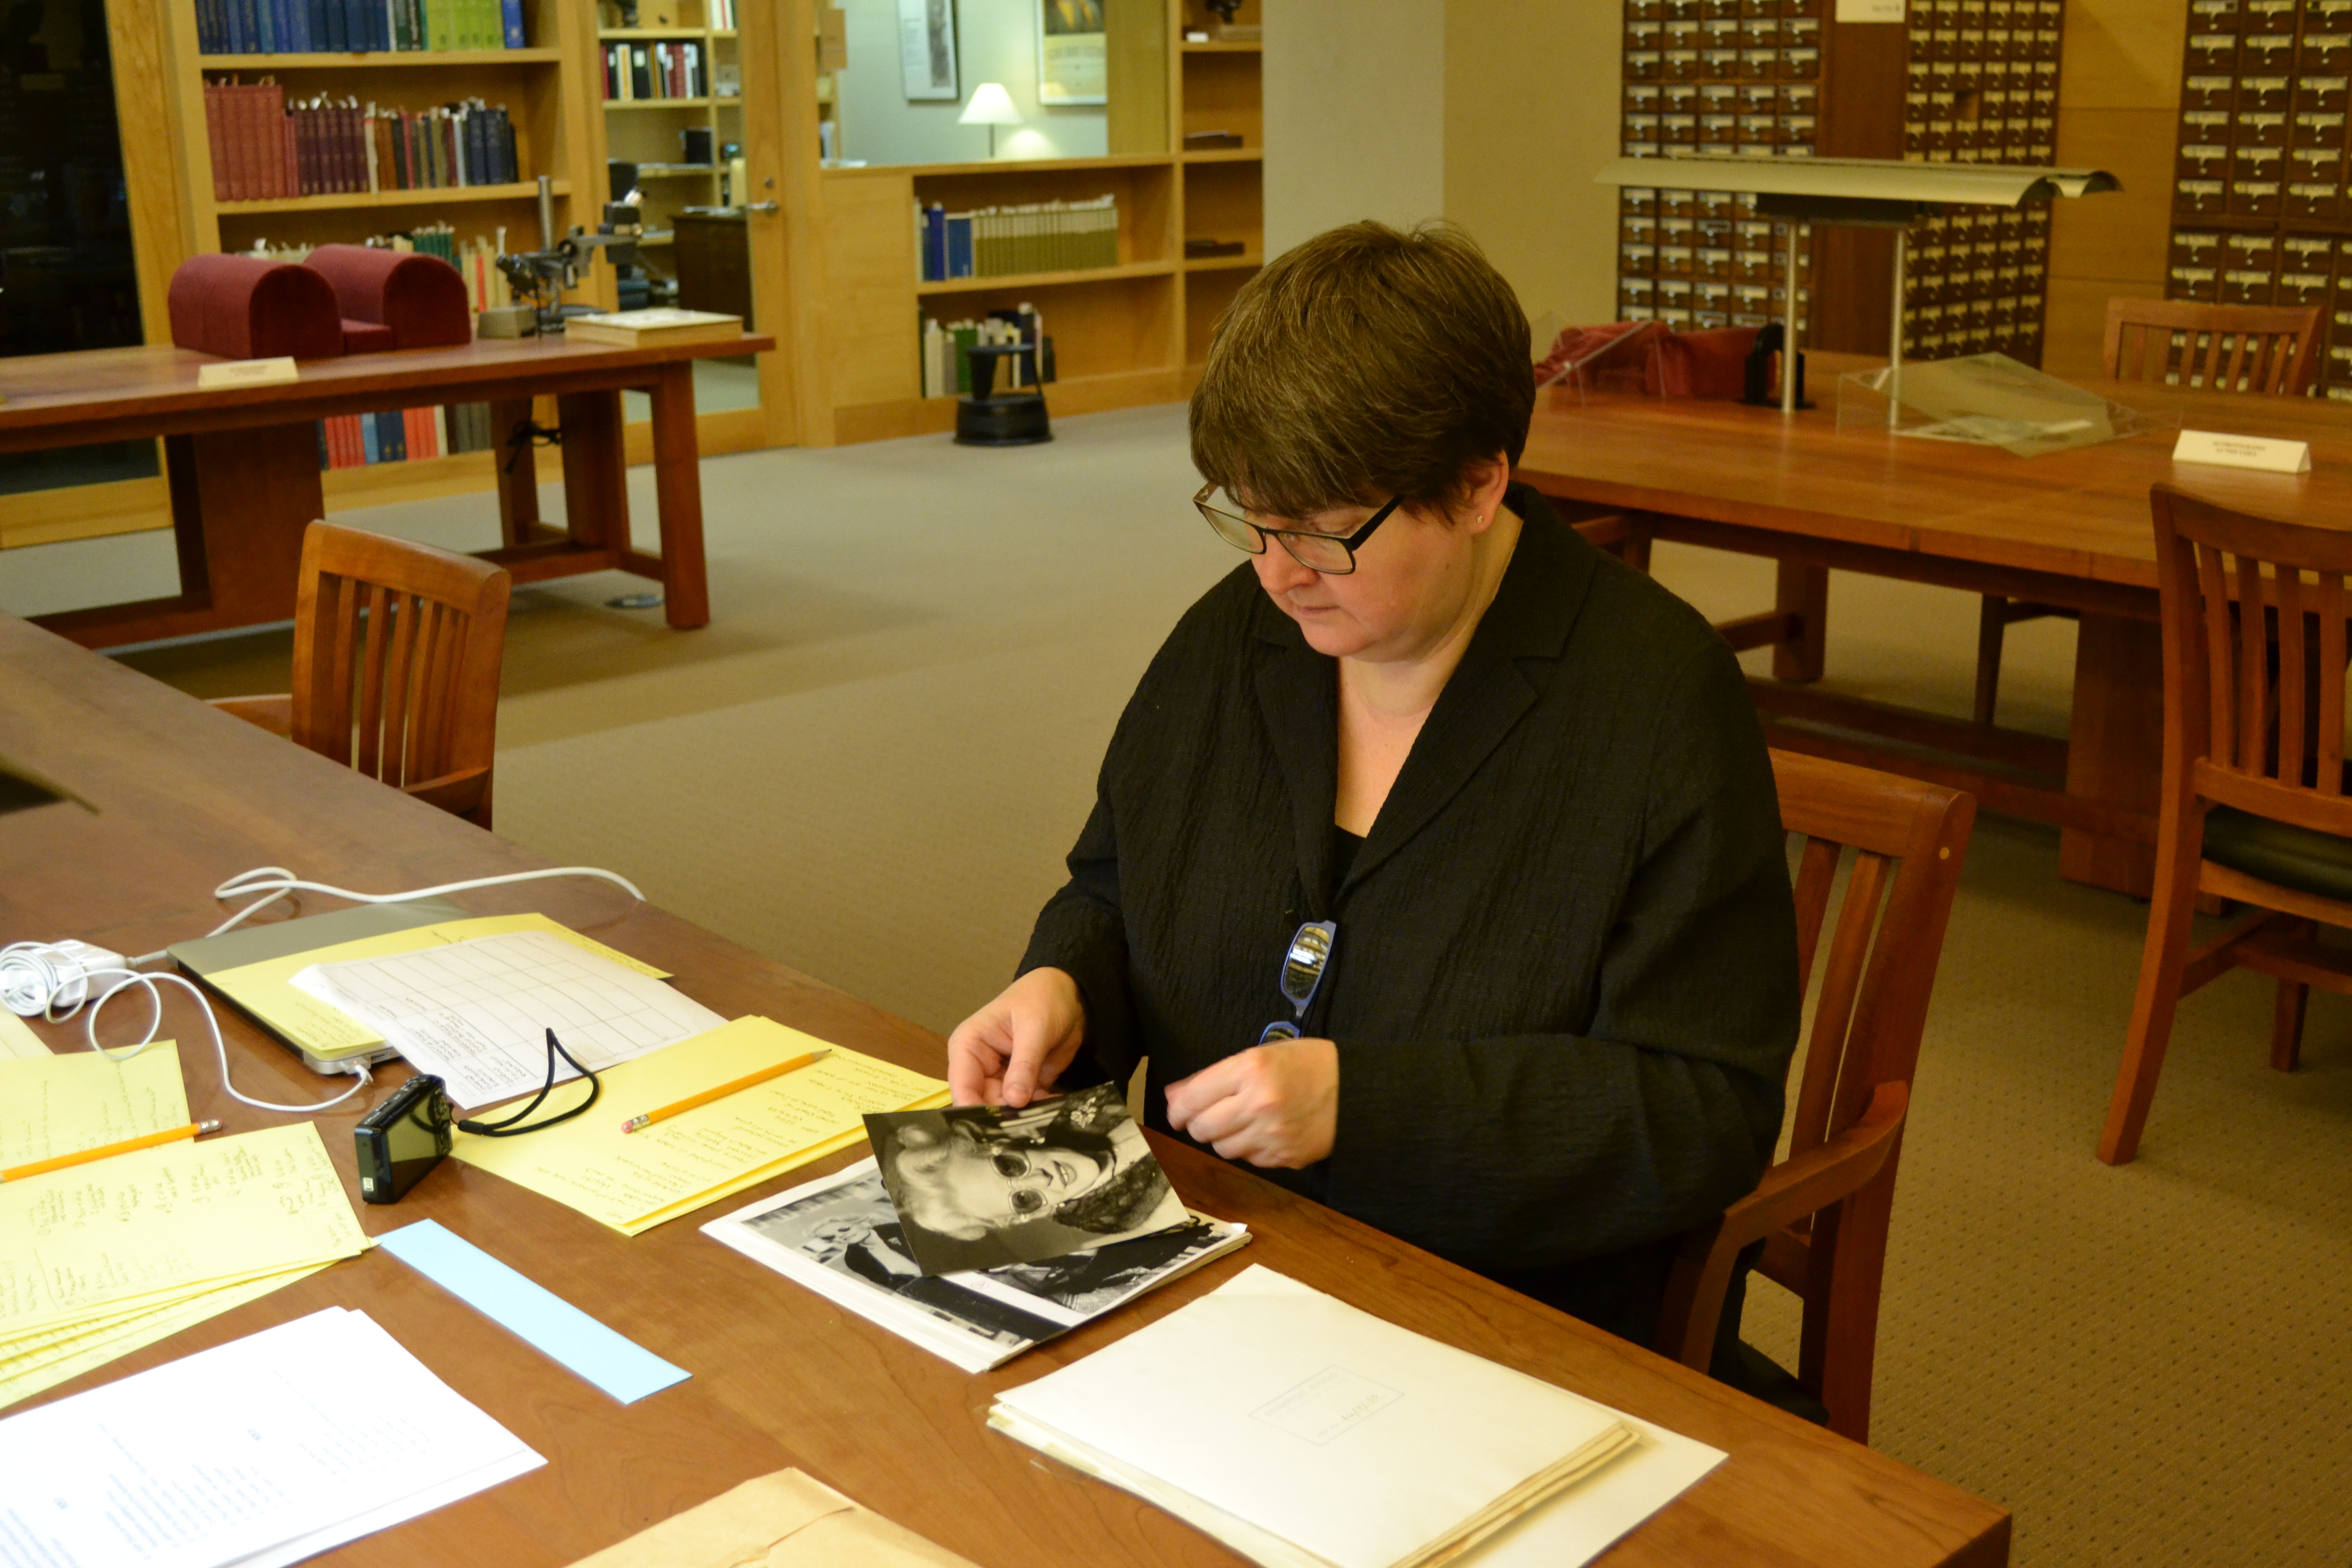 Scholar Teal Triggs works with materials in the Fleur Cowles archive in the Ransom Center's Reading Room. Photo by Alicia Dietrich.